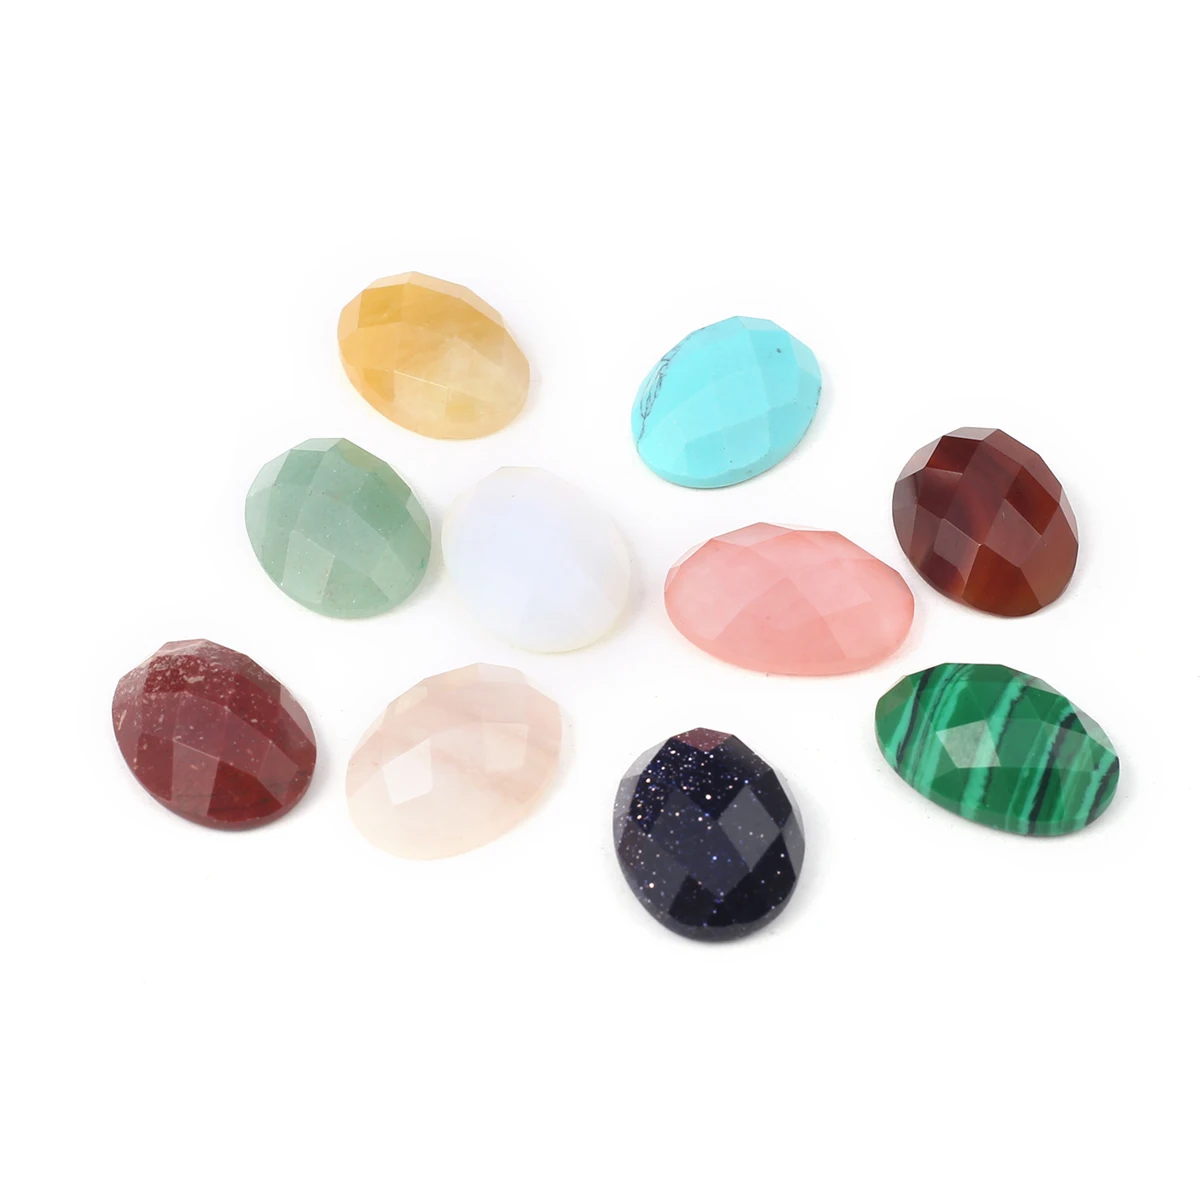 

Natural Stone Striped Agates Cabochon Bead Oval Faceted Beads Setting Fit Pendants Rings Earring Jewelry Gift Making 18x13mm